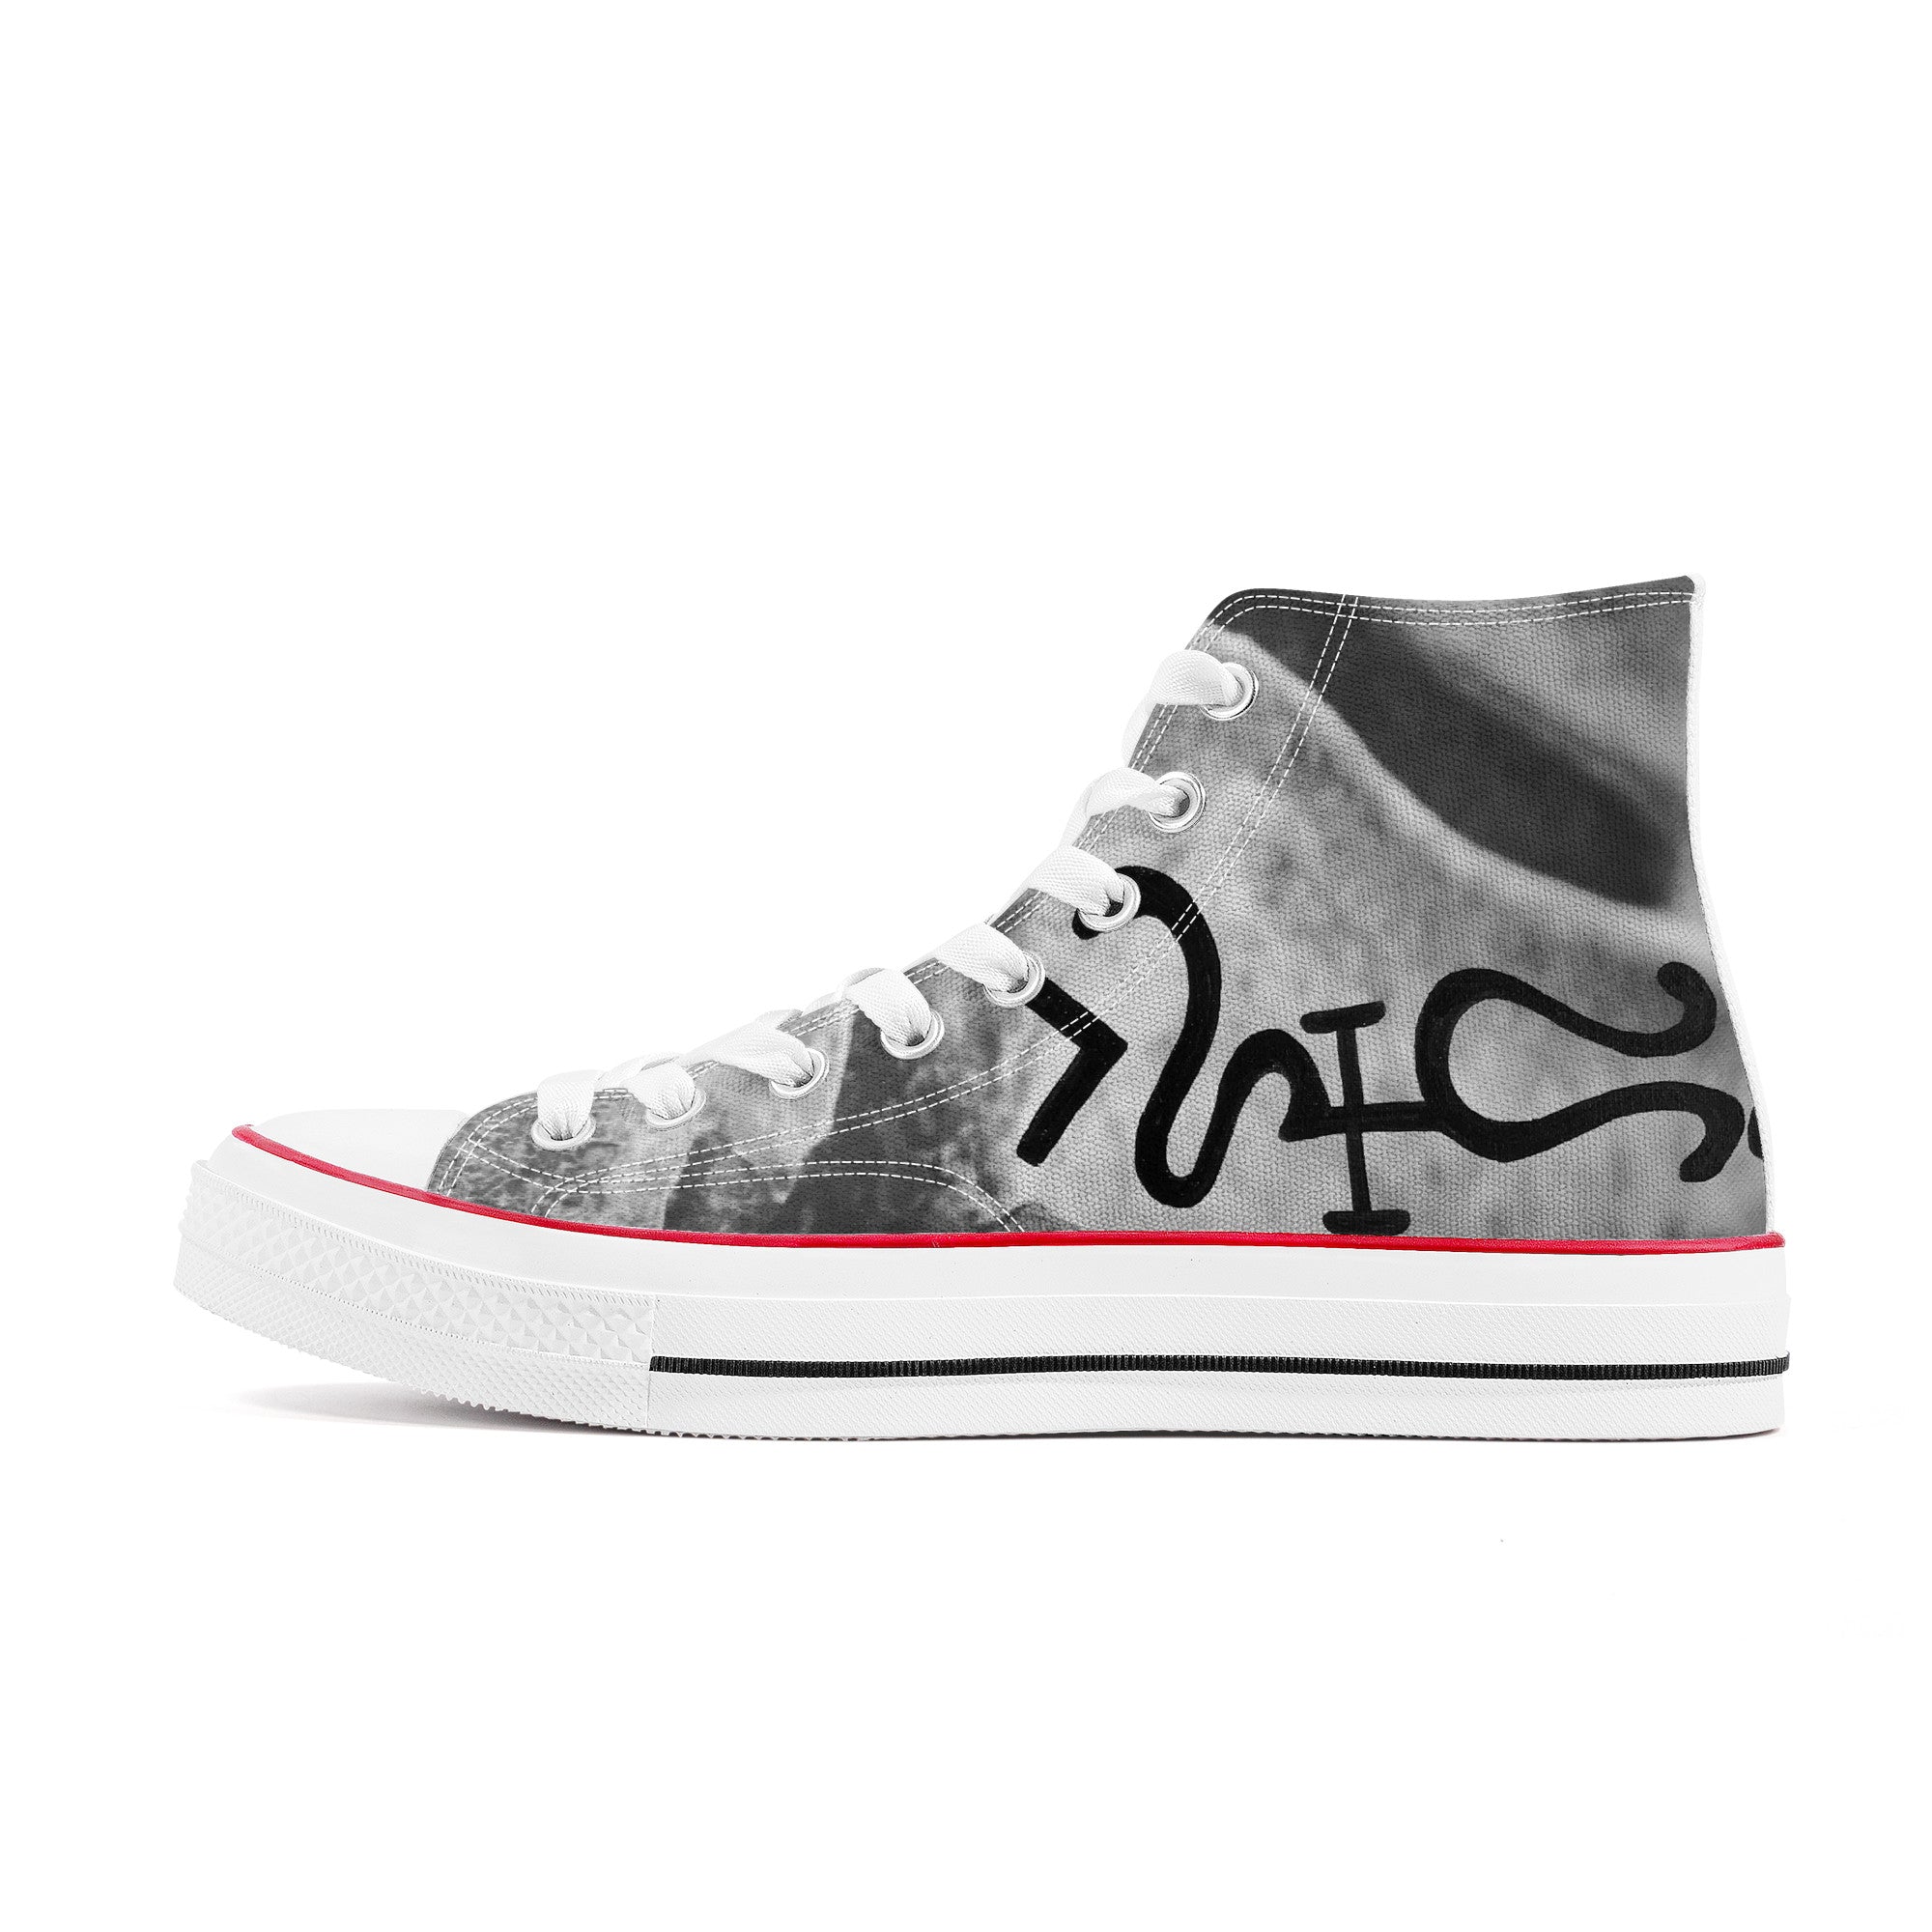 We Thank You | Customized High Top Canvas Shoes - White - Shoe Zero